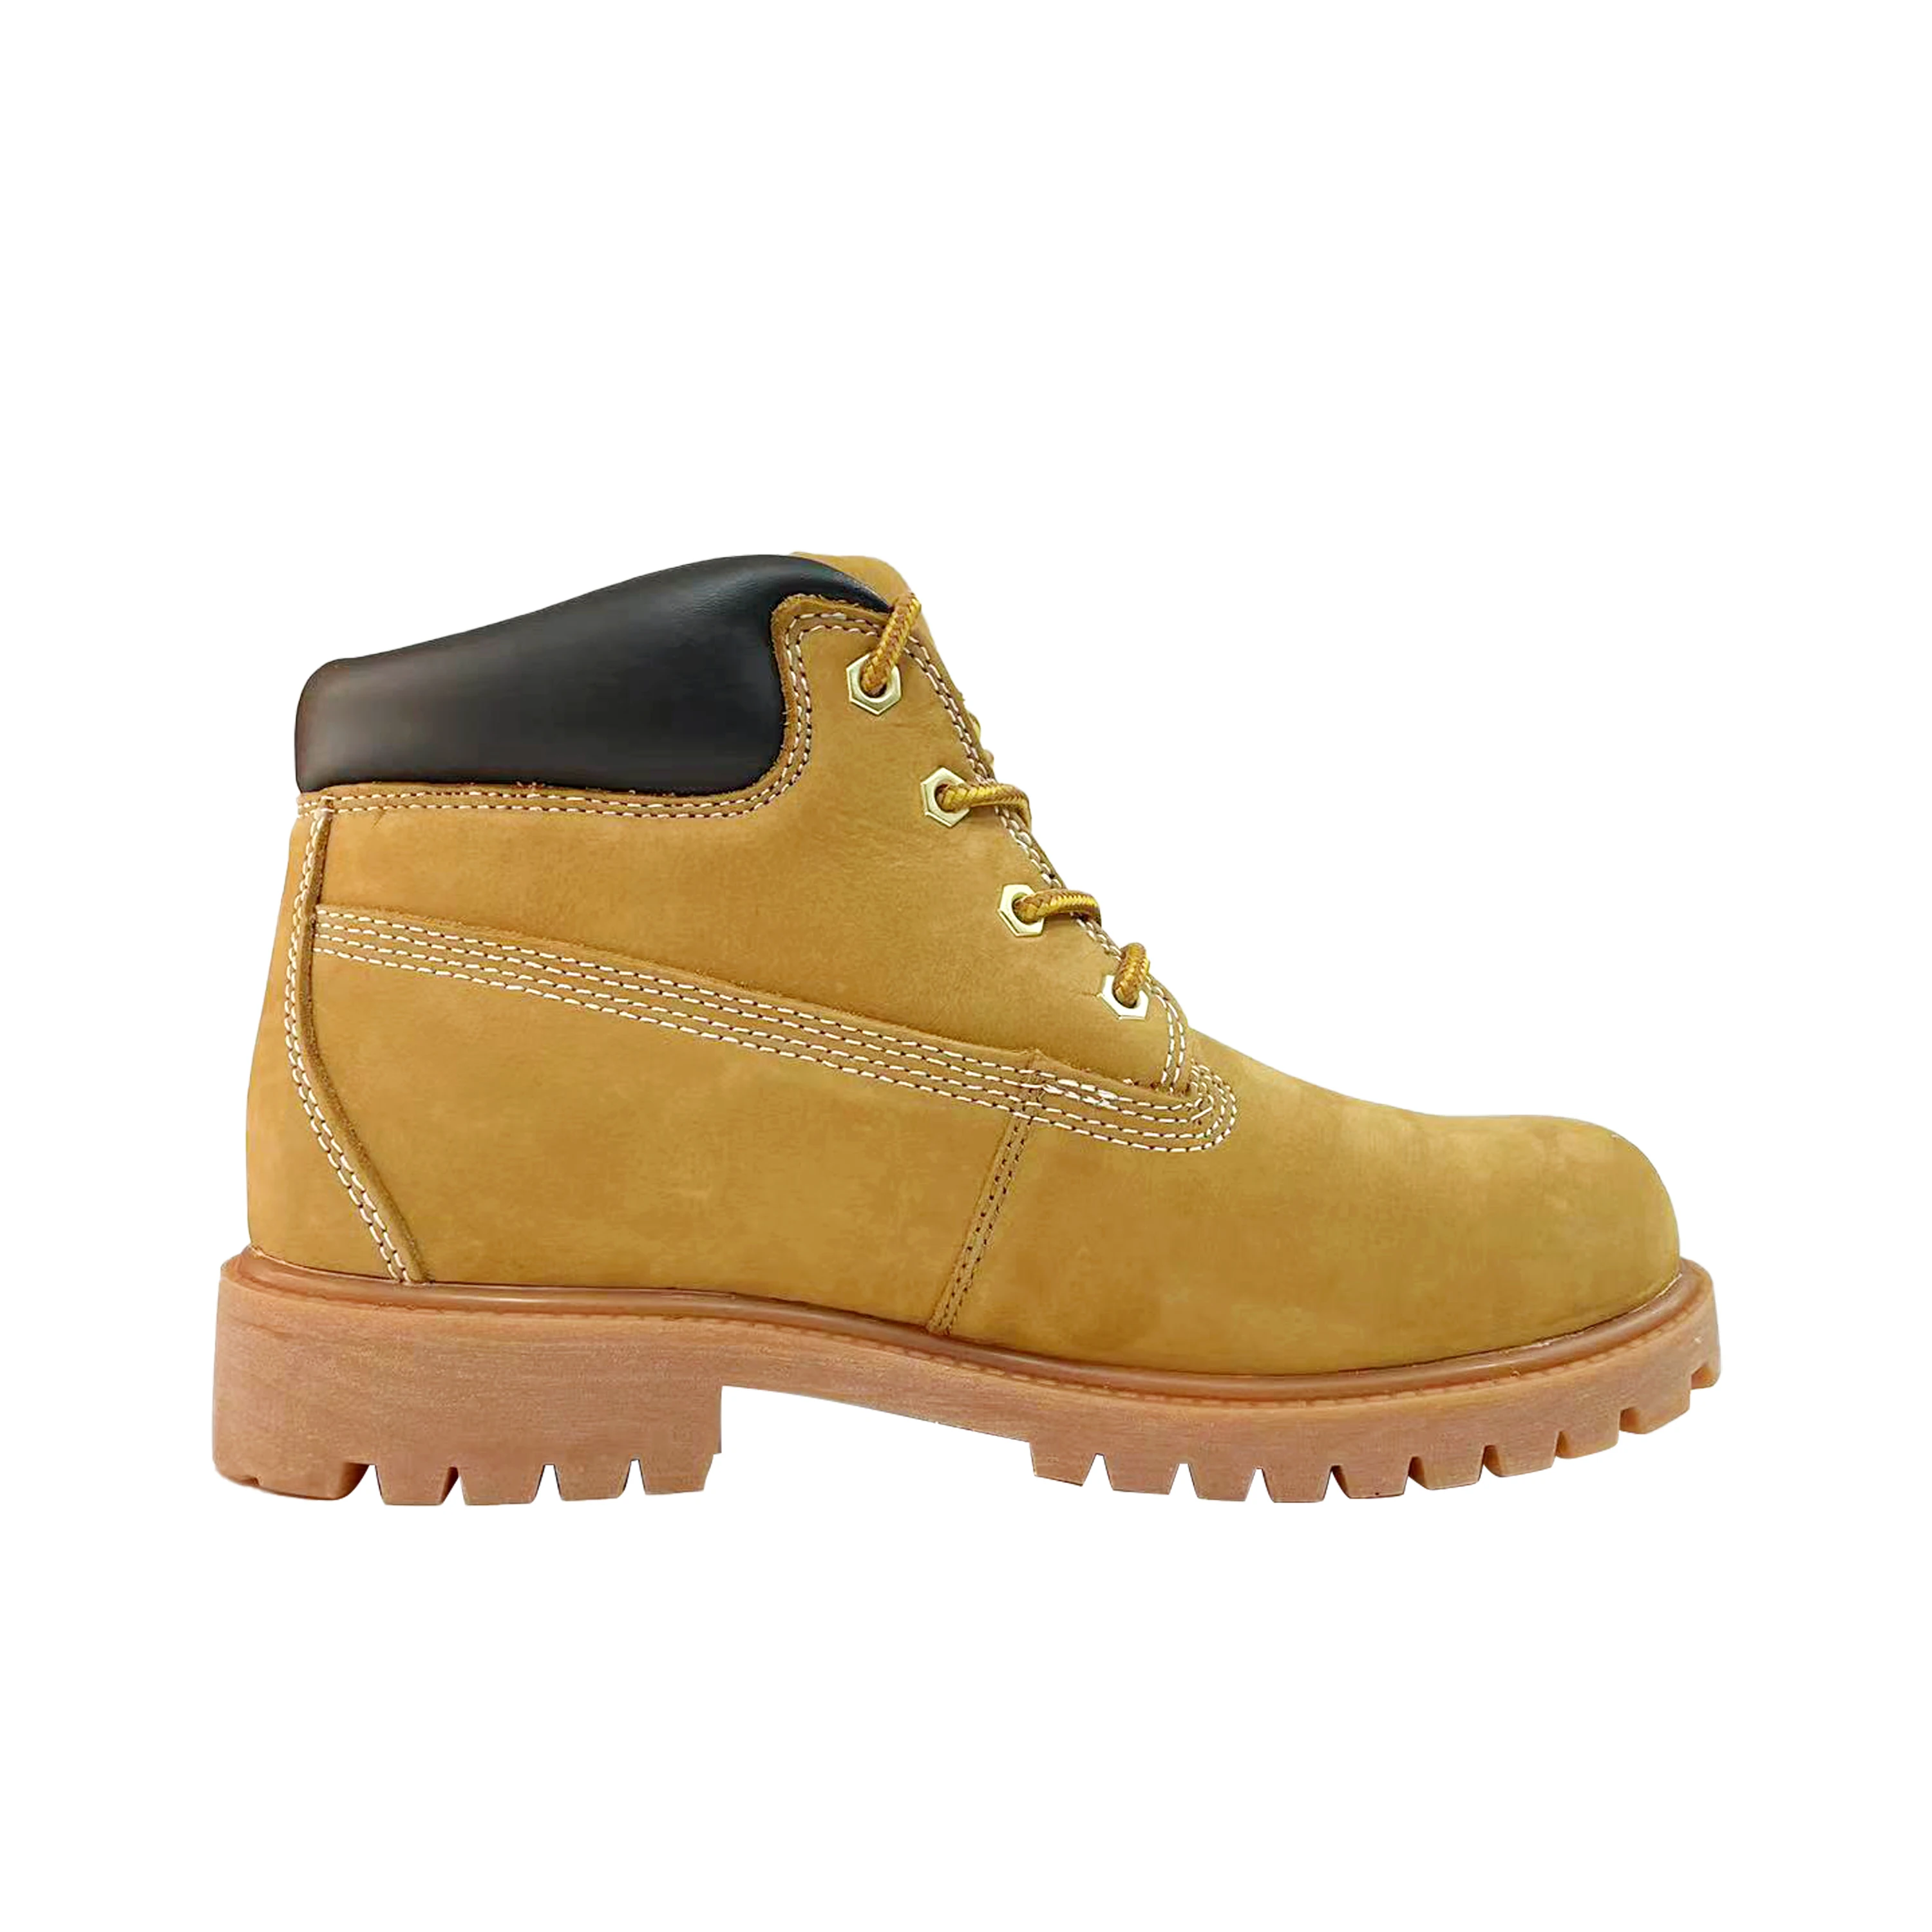 Wholesale Ltrail-ready Durable Classic Casual Boots Outdoor Wheat ...